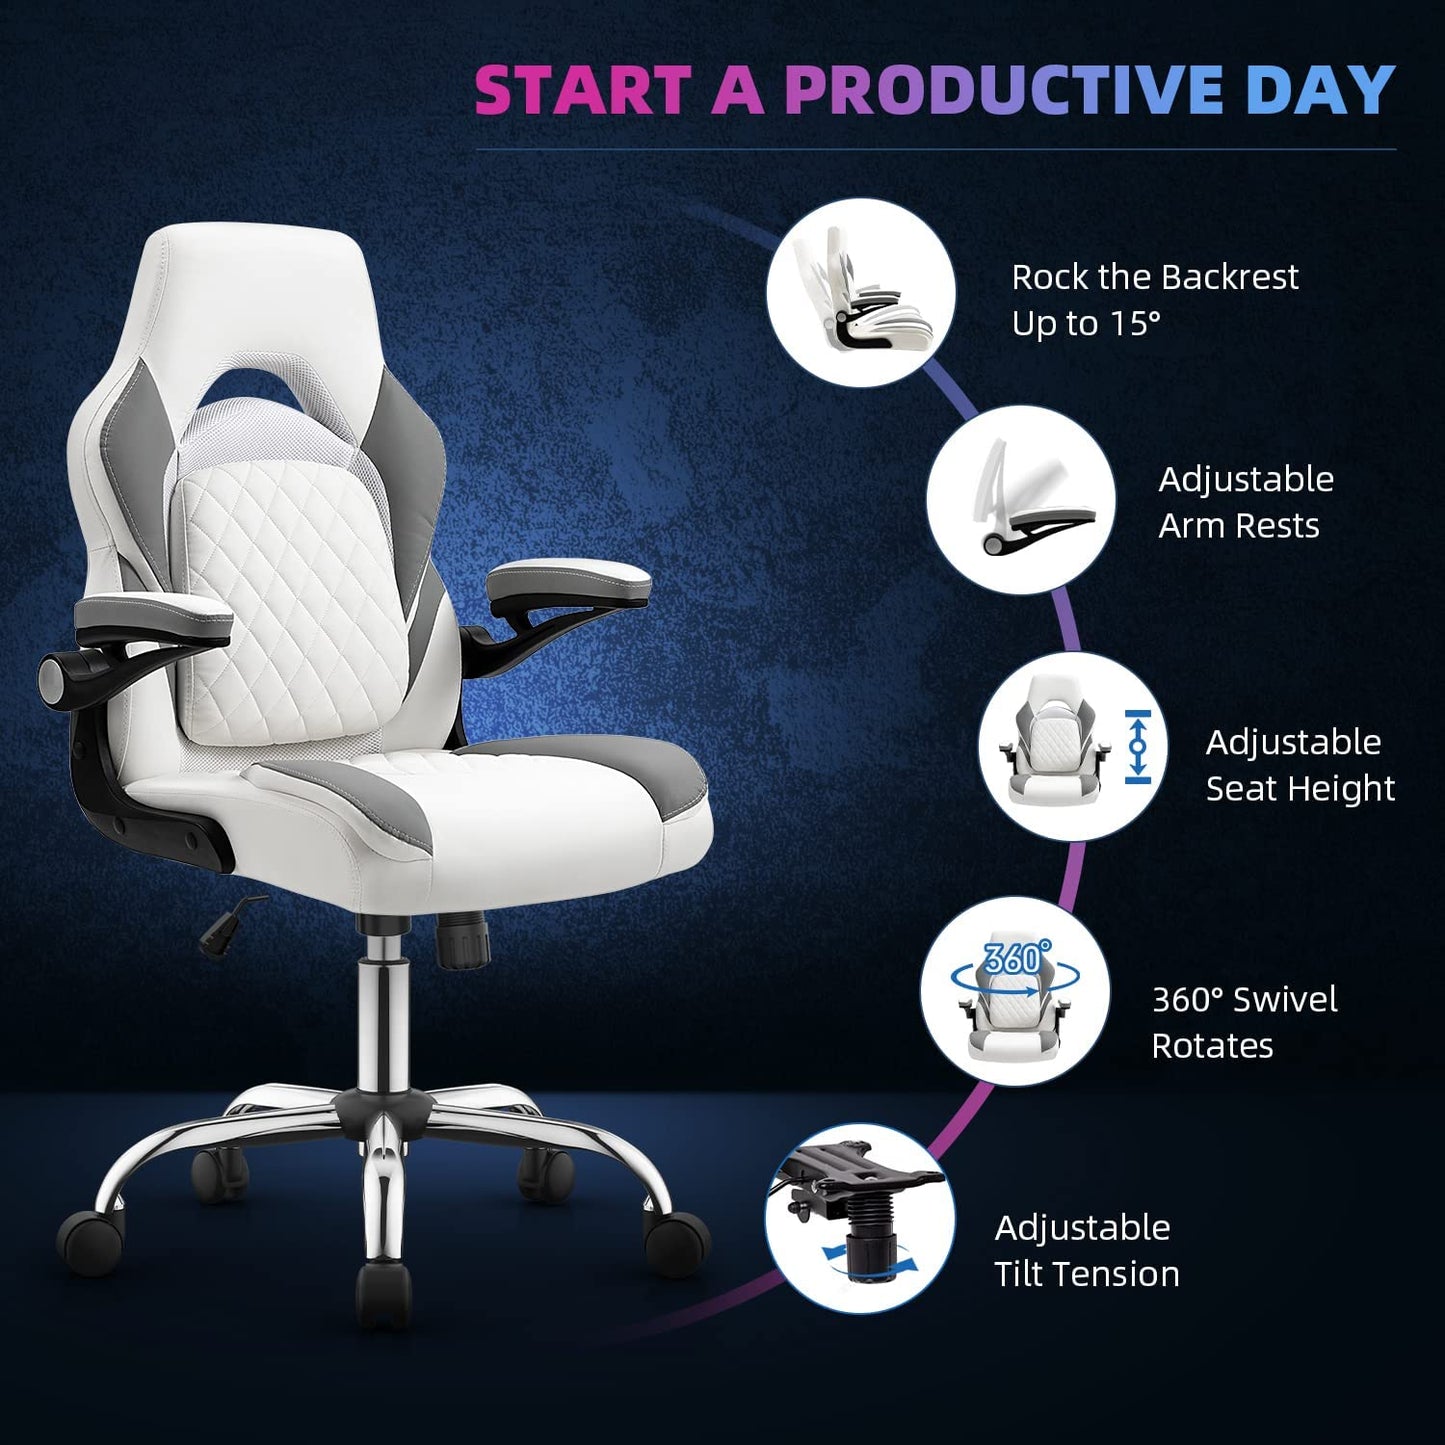 Gaming Chair Ergonomic Office Chair PC Desk Chair with Lumbar Support Flip up Arms Racing Style PU Leather Executive Computer Chair for Adults,Grey